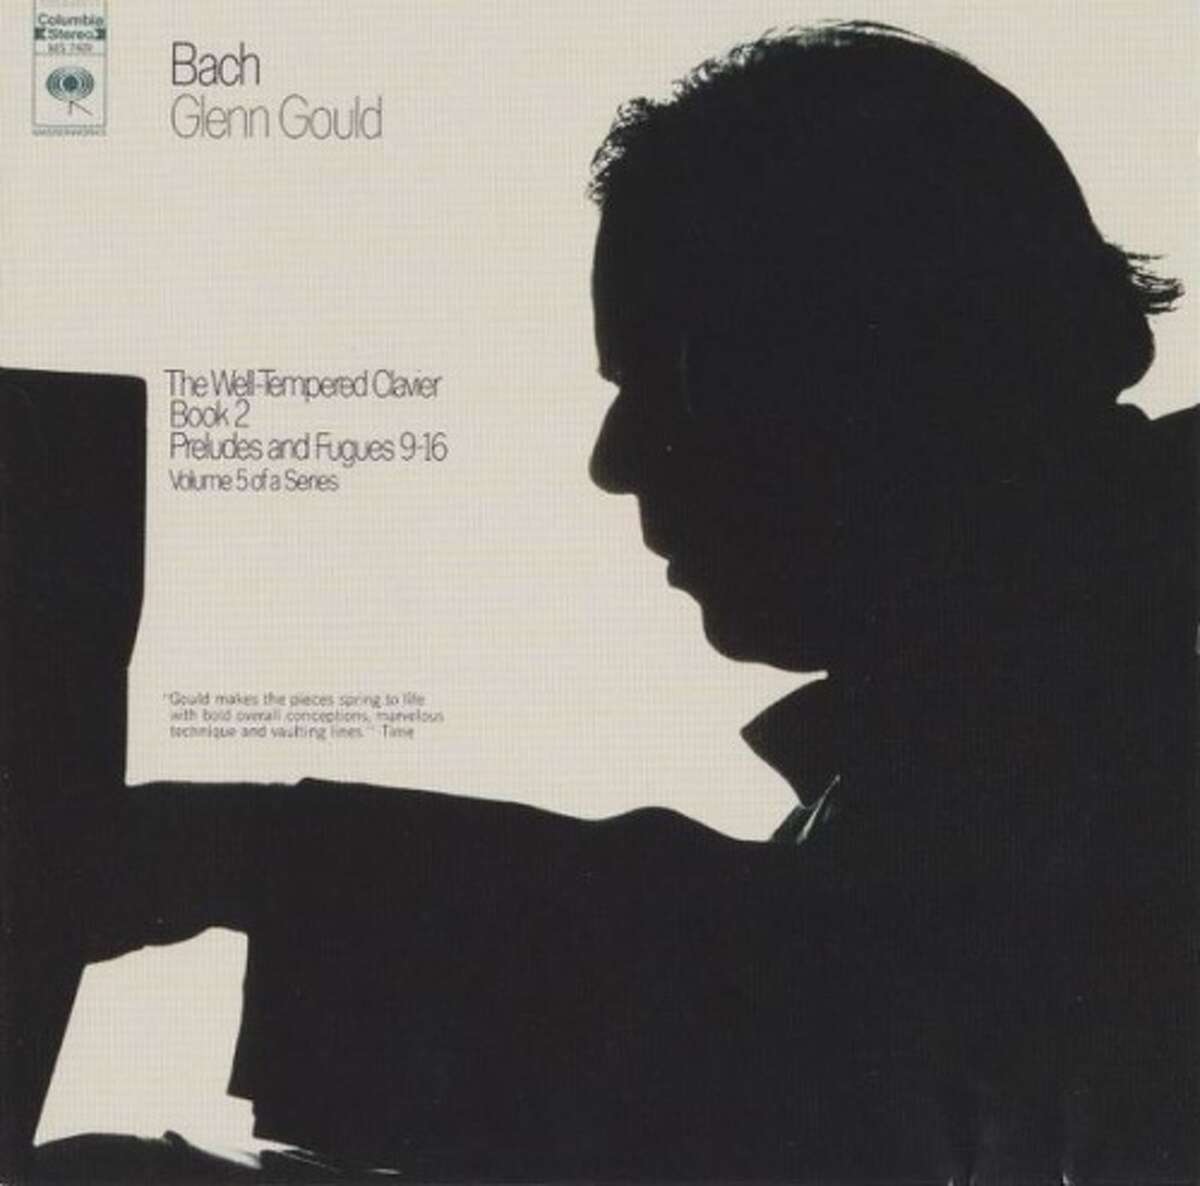 The Well-Tempered Clavier Book 2, Glenn Gould (1972)